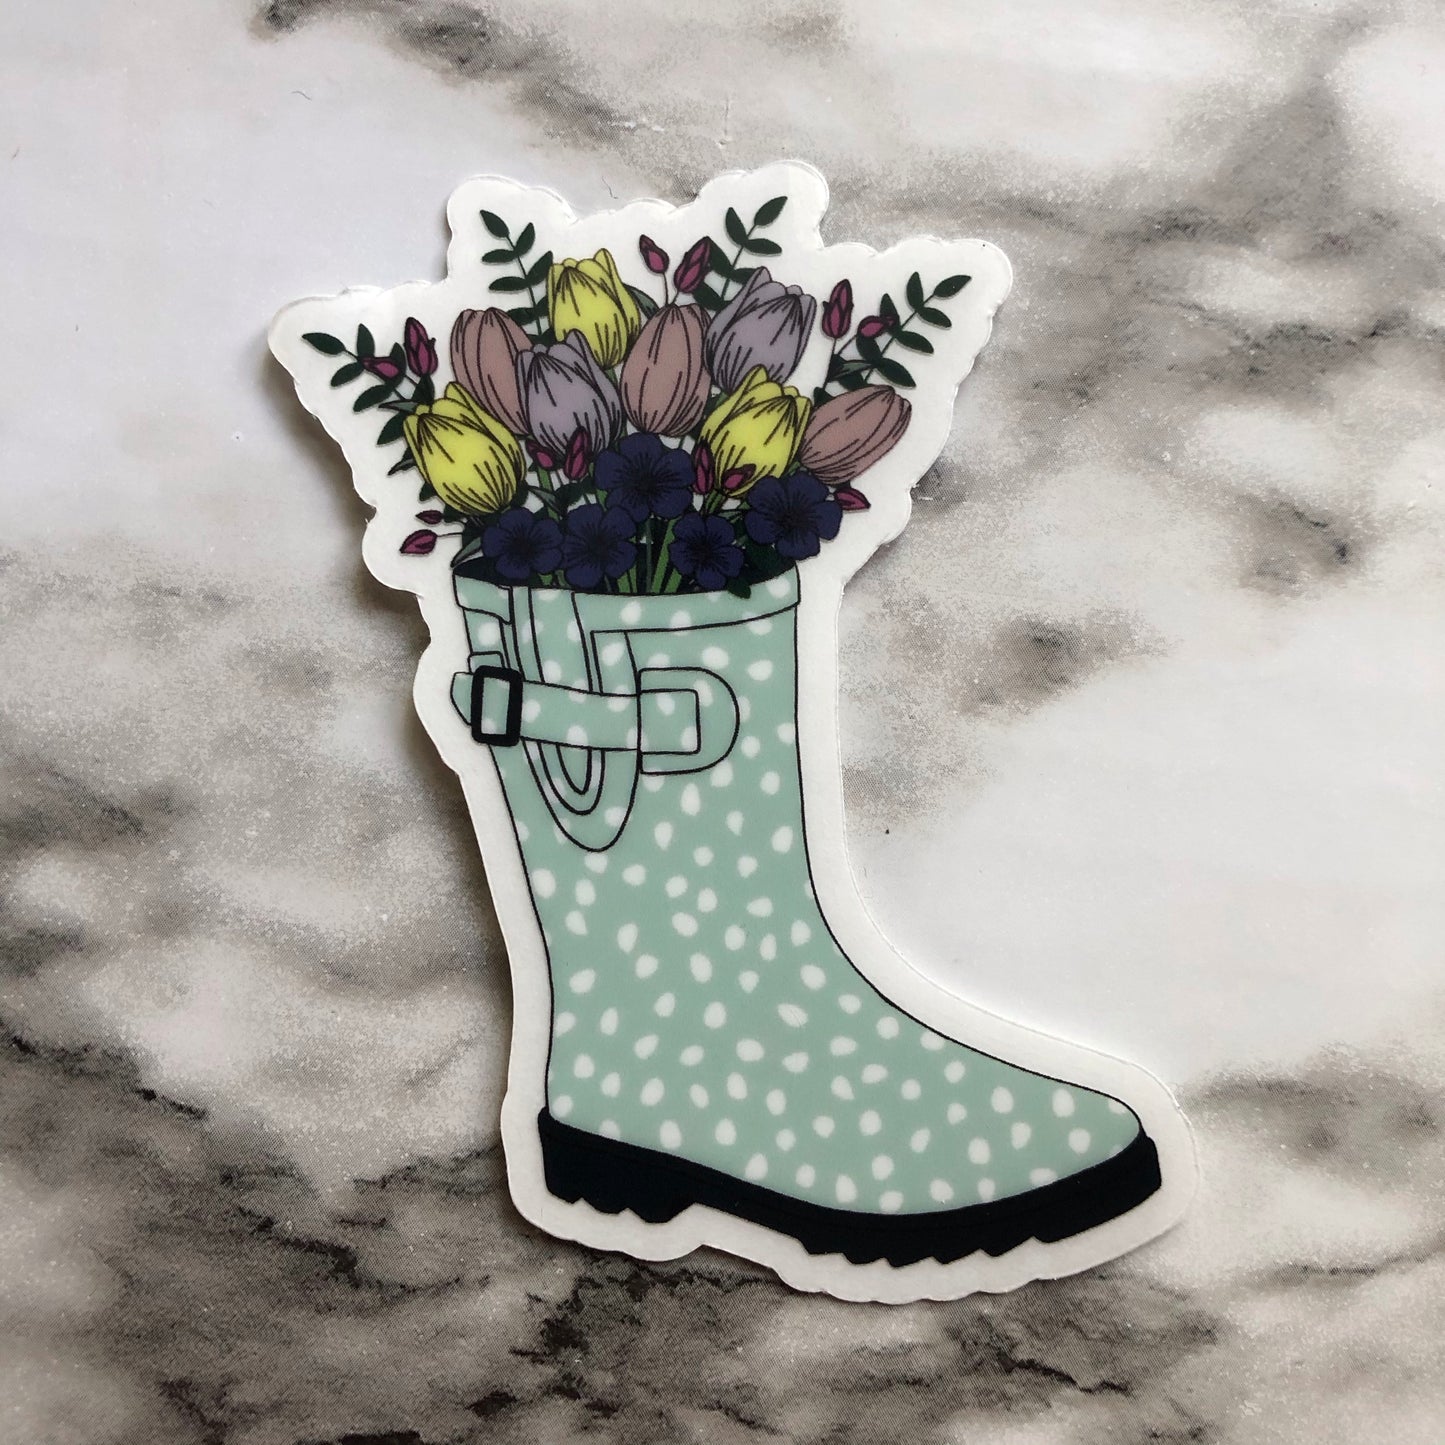 Rain Boot with Tulips CLEAR Vinyl Sticker